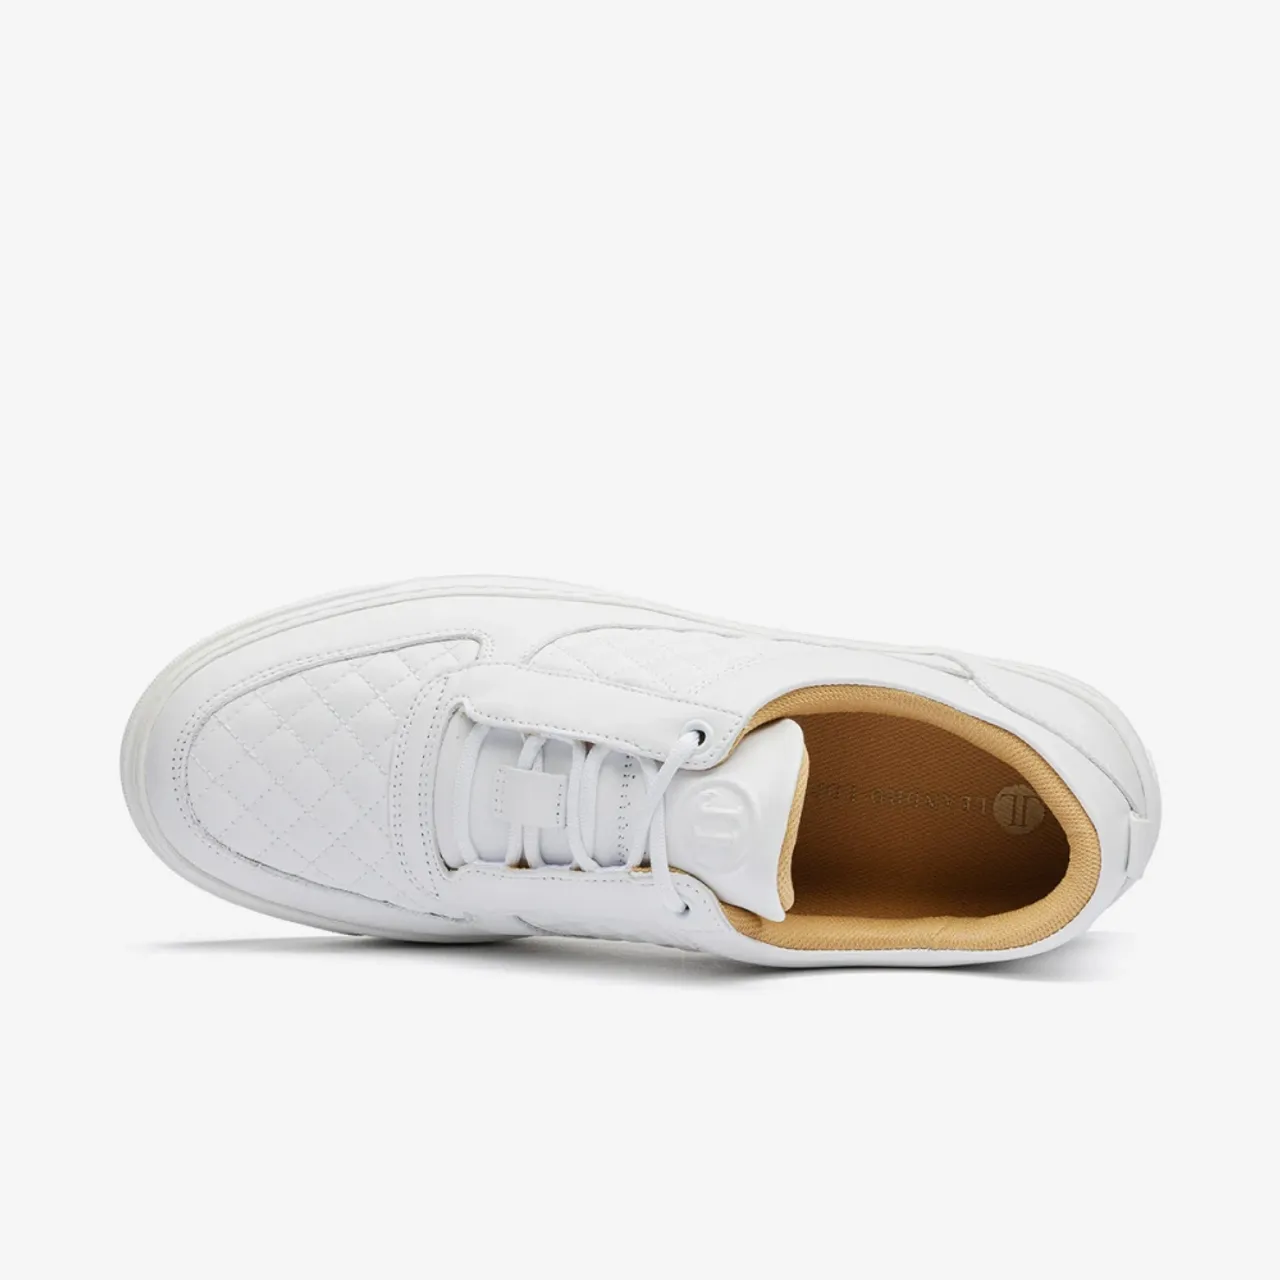 Weißer Low Top Sneaker Faisca Leandro Lopes